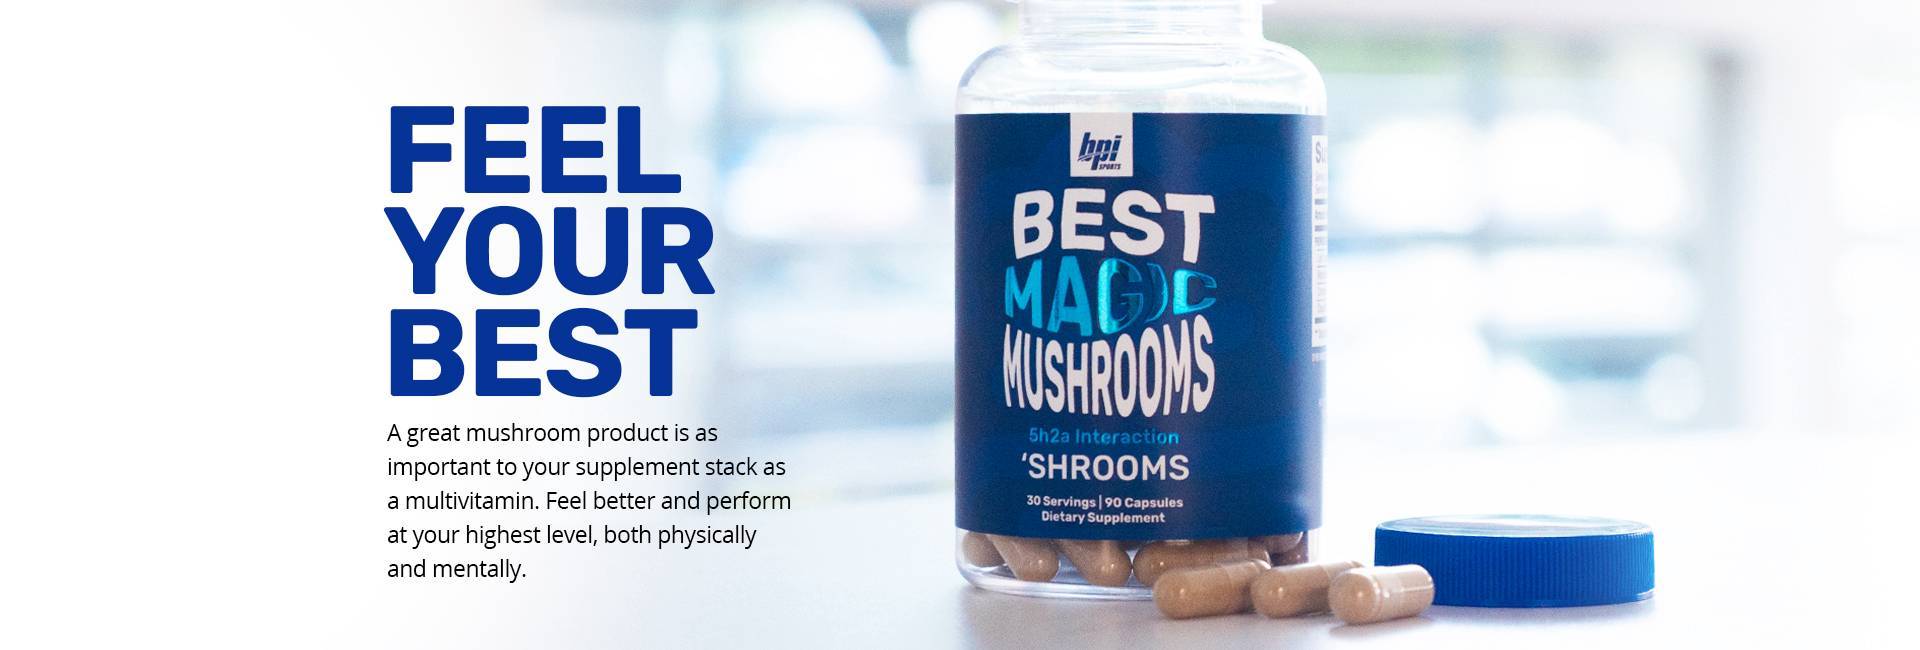 Feel your best with Best Magic Mushrooms